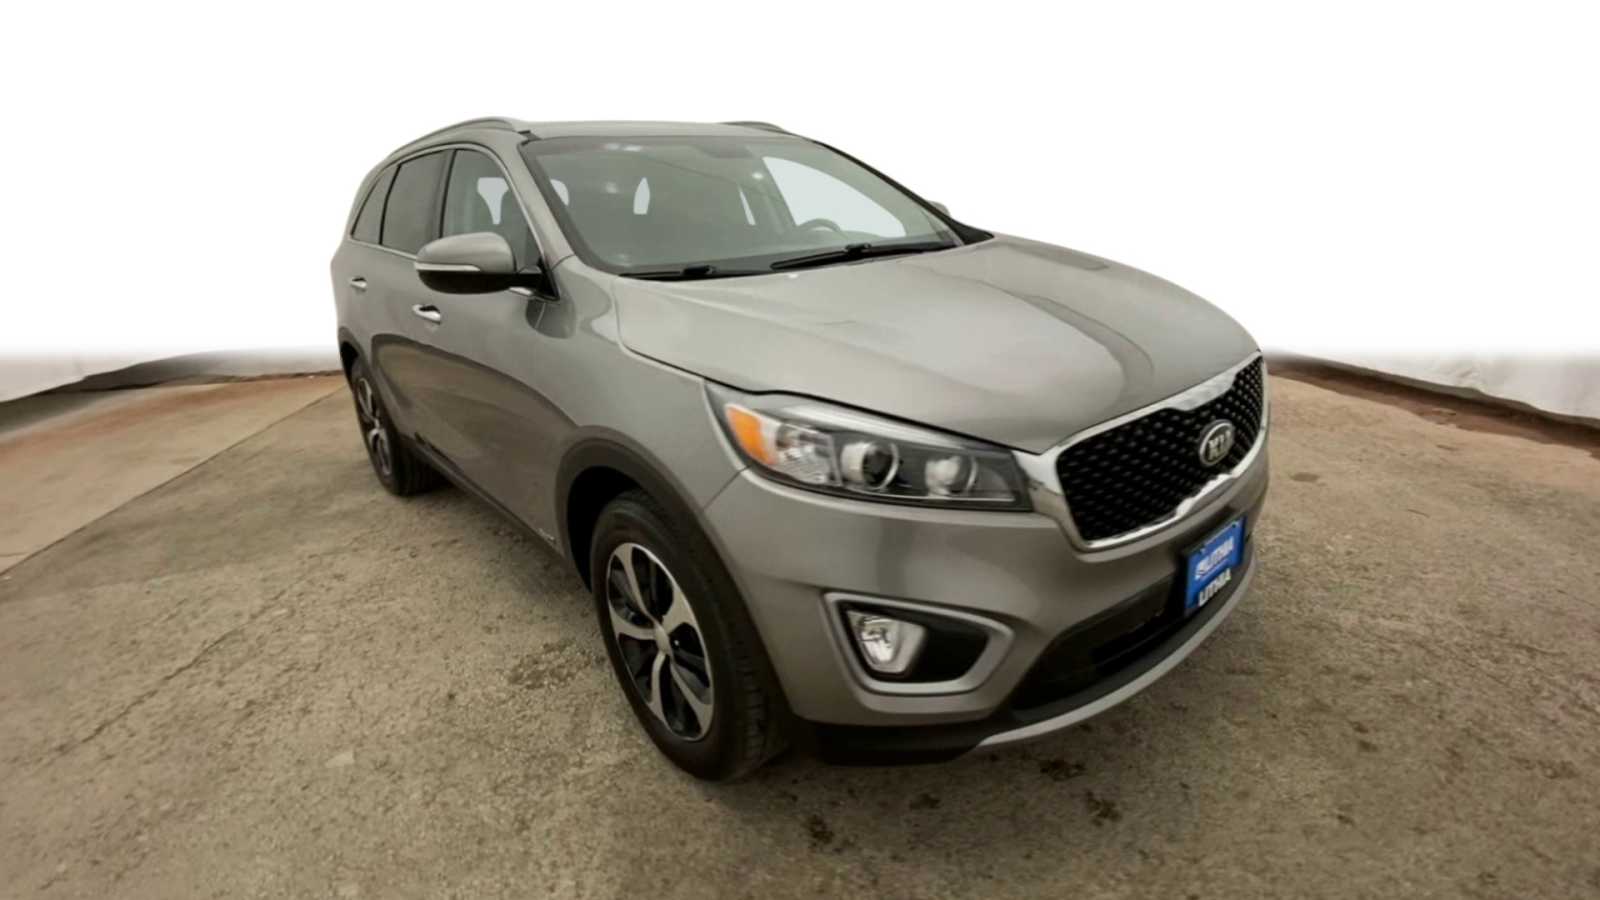 Used 2017 Kia Sorento EX with VIN 5XYPHDA16HG273620 for sale in Great Falls, MT